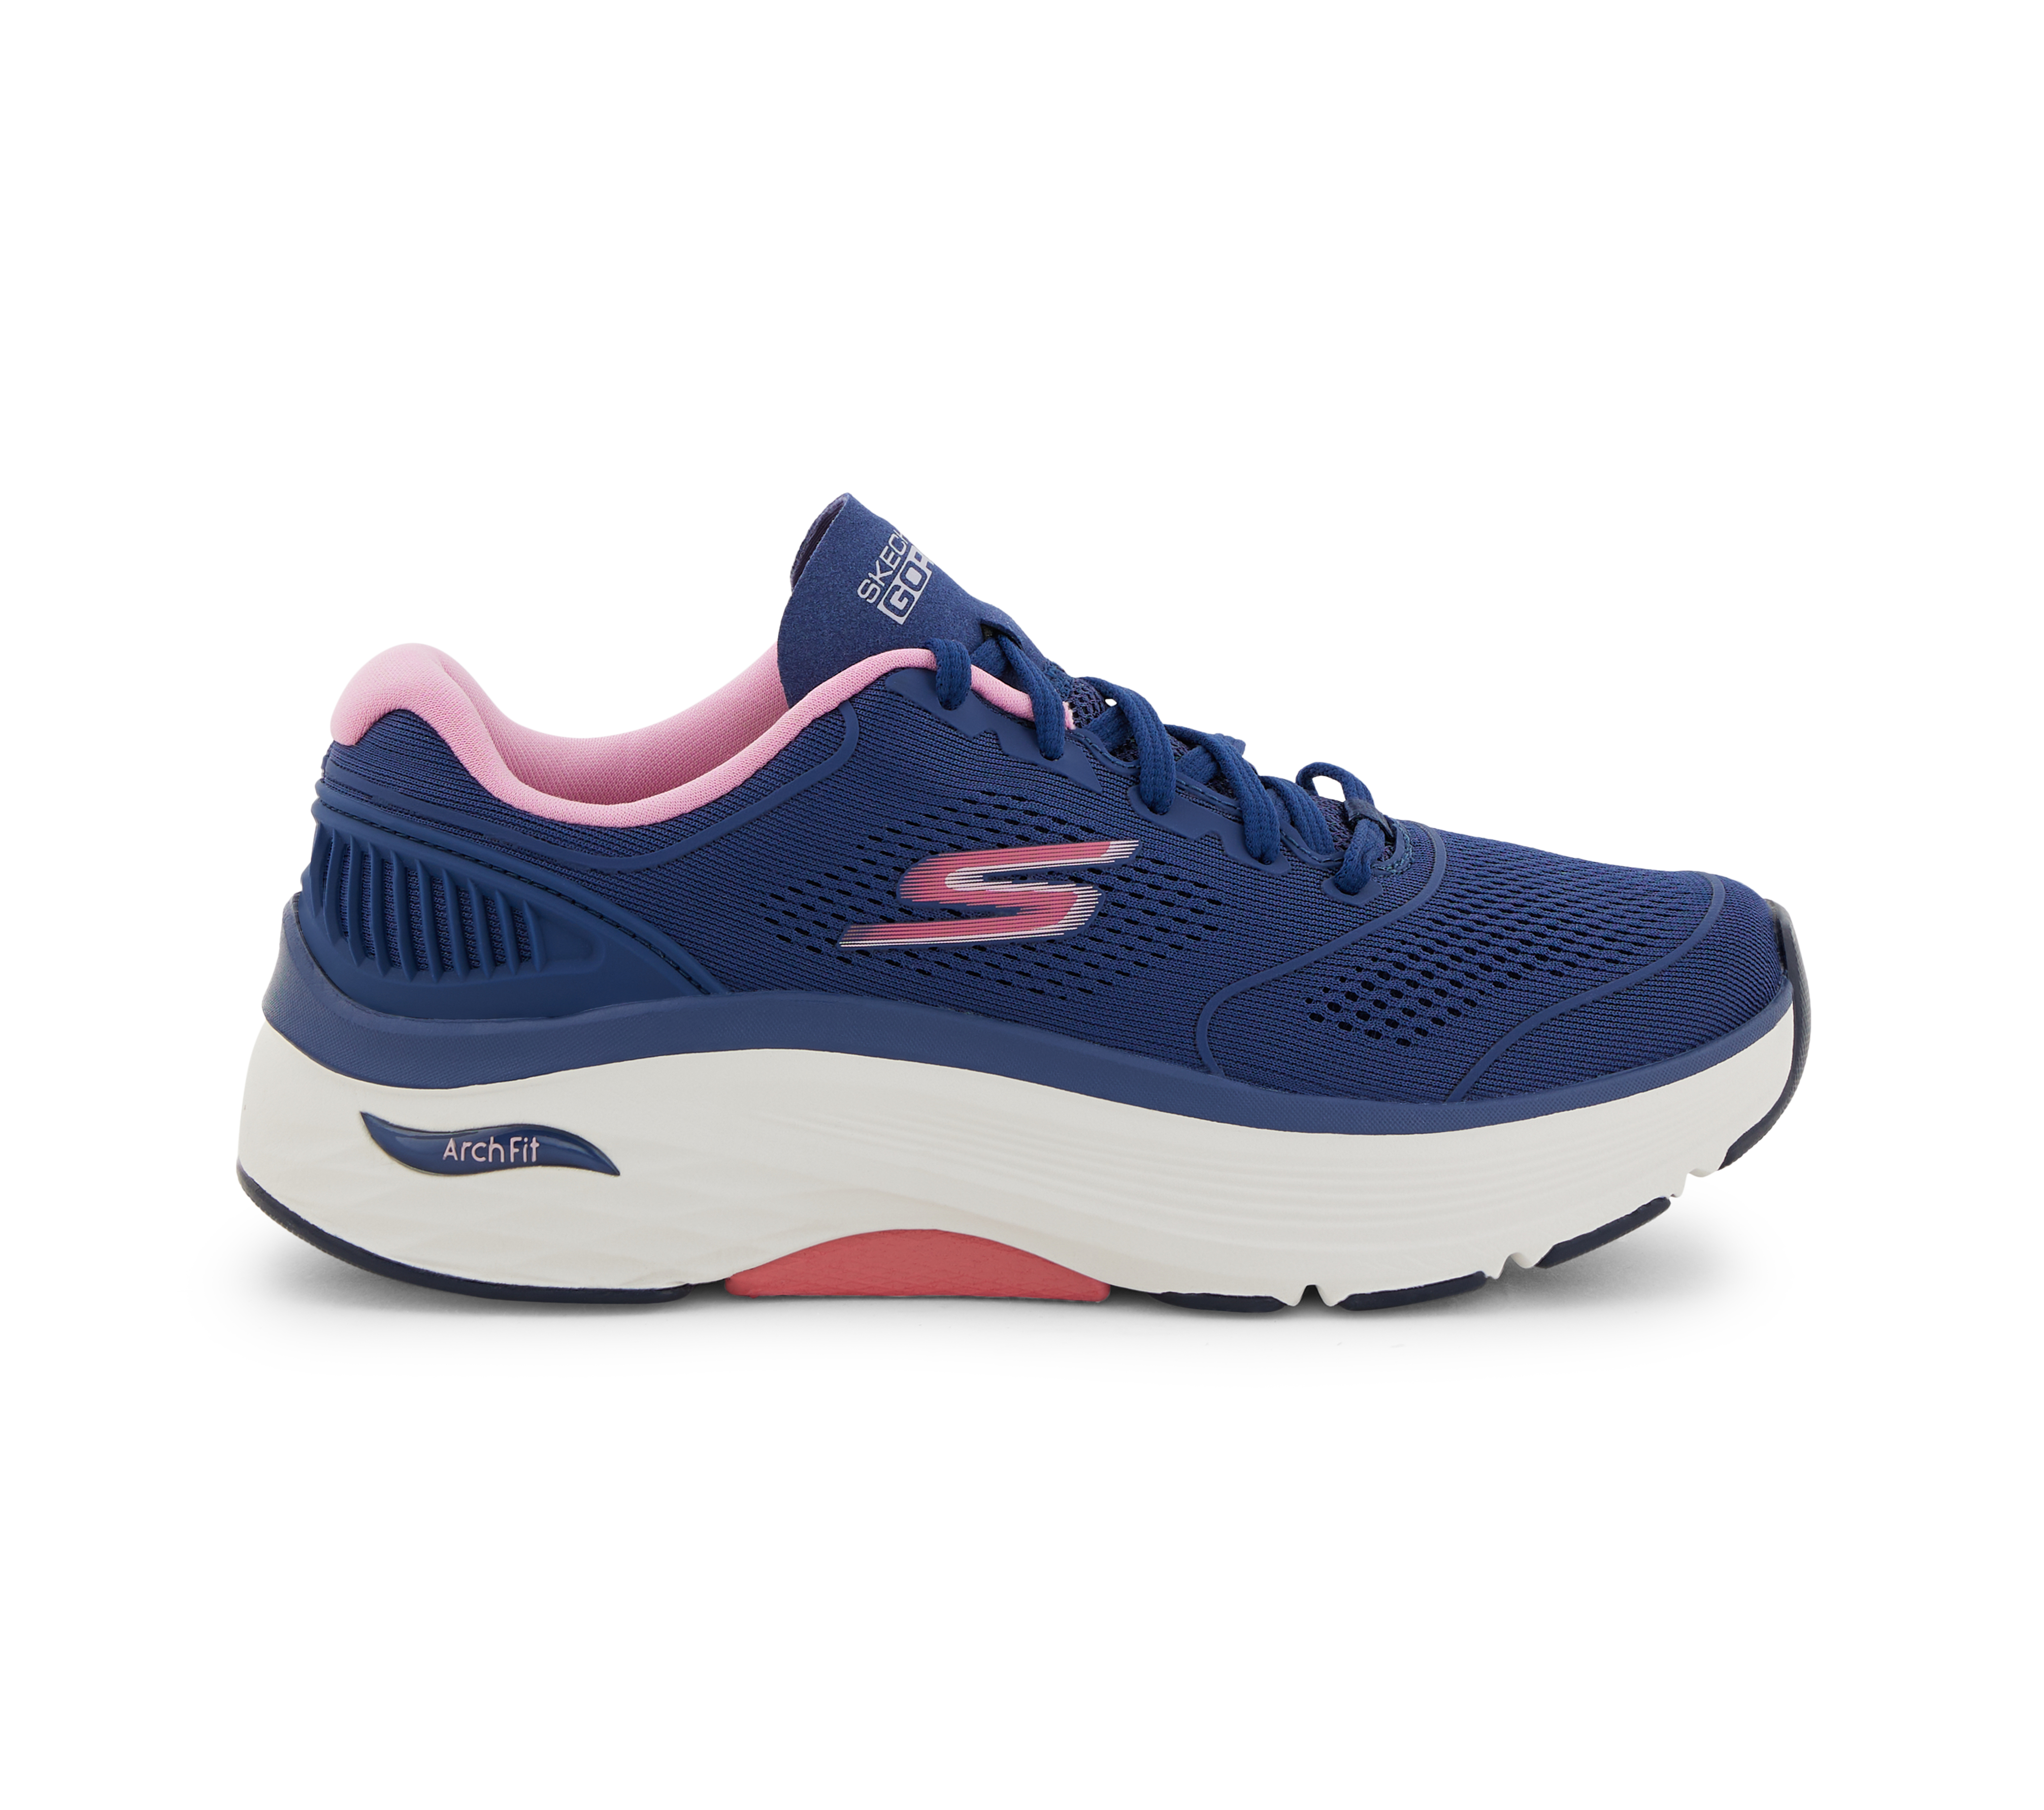 MAX CUSHIONING ARCH FIT - SWI, NAVY/PINK Footwear Right View